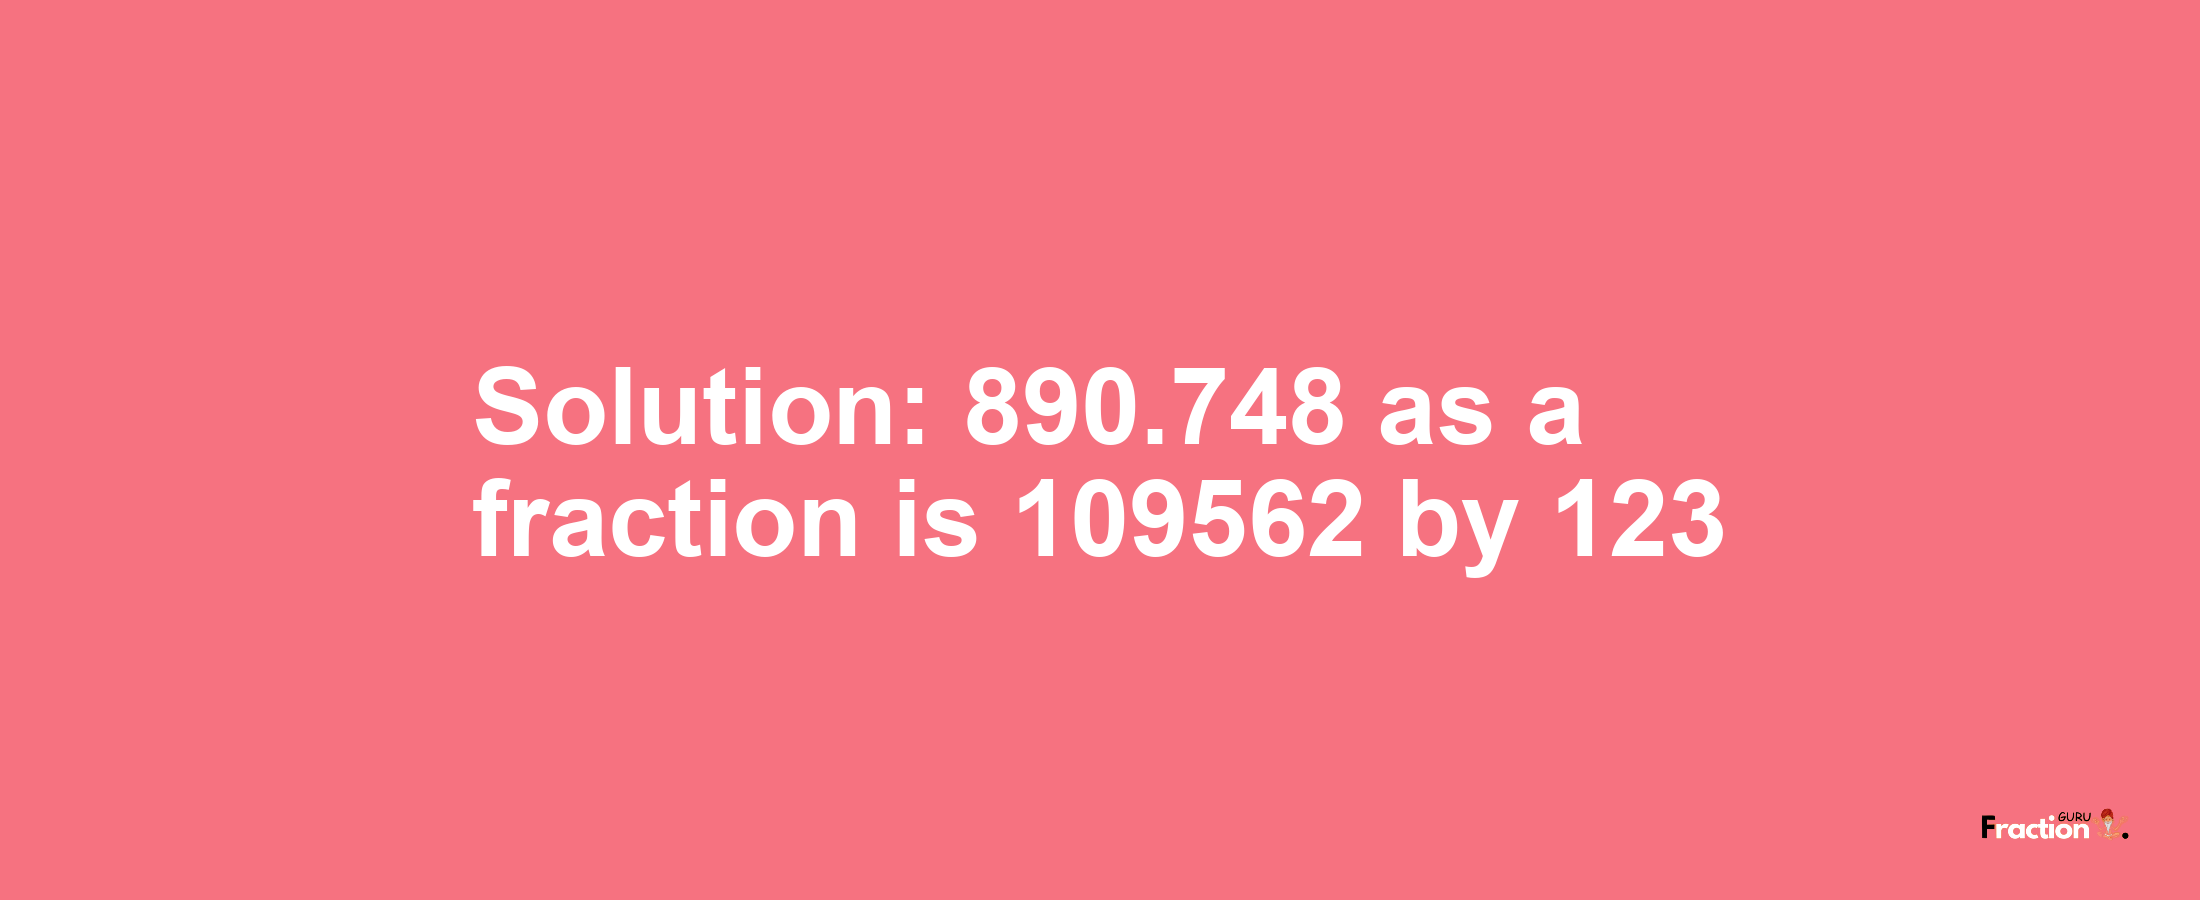 Solution:890.748 as a fraction is 109562/123